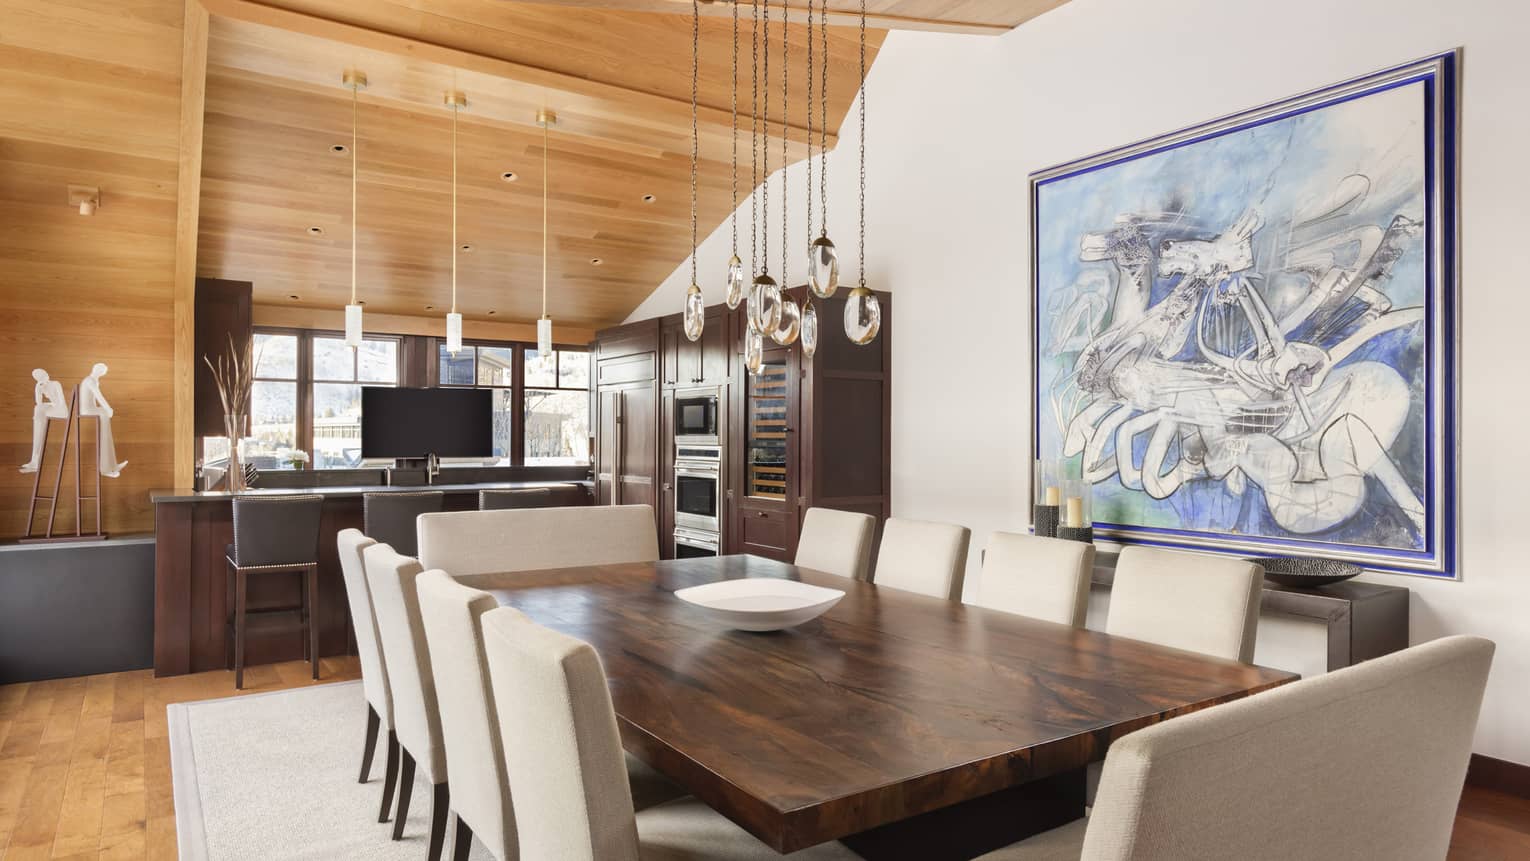 Dining table with 10 cushioned chairs, leading into kitchen with wooden vaulted ceiling